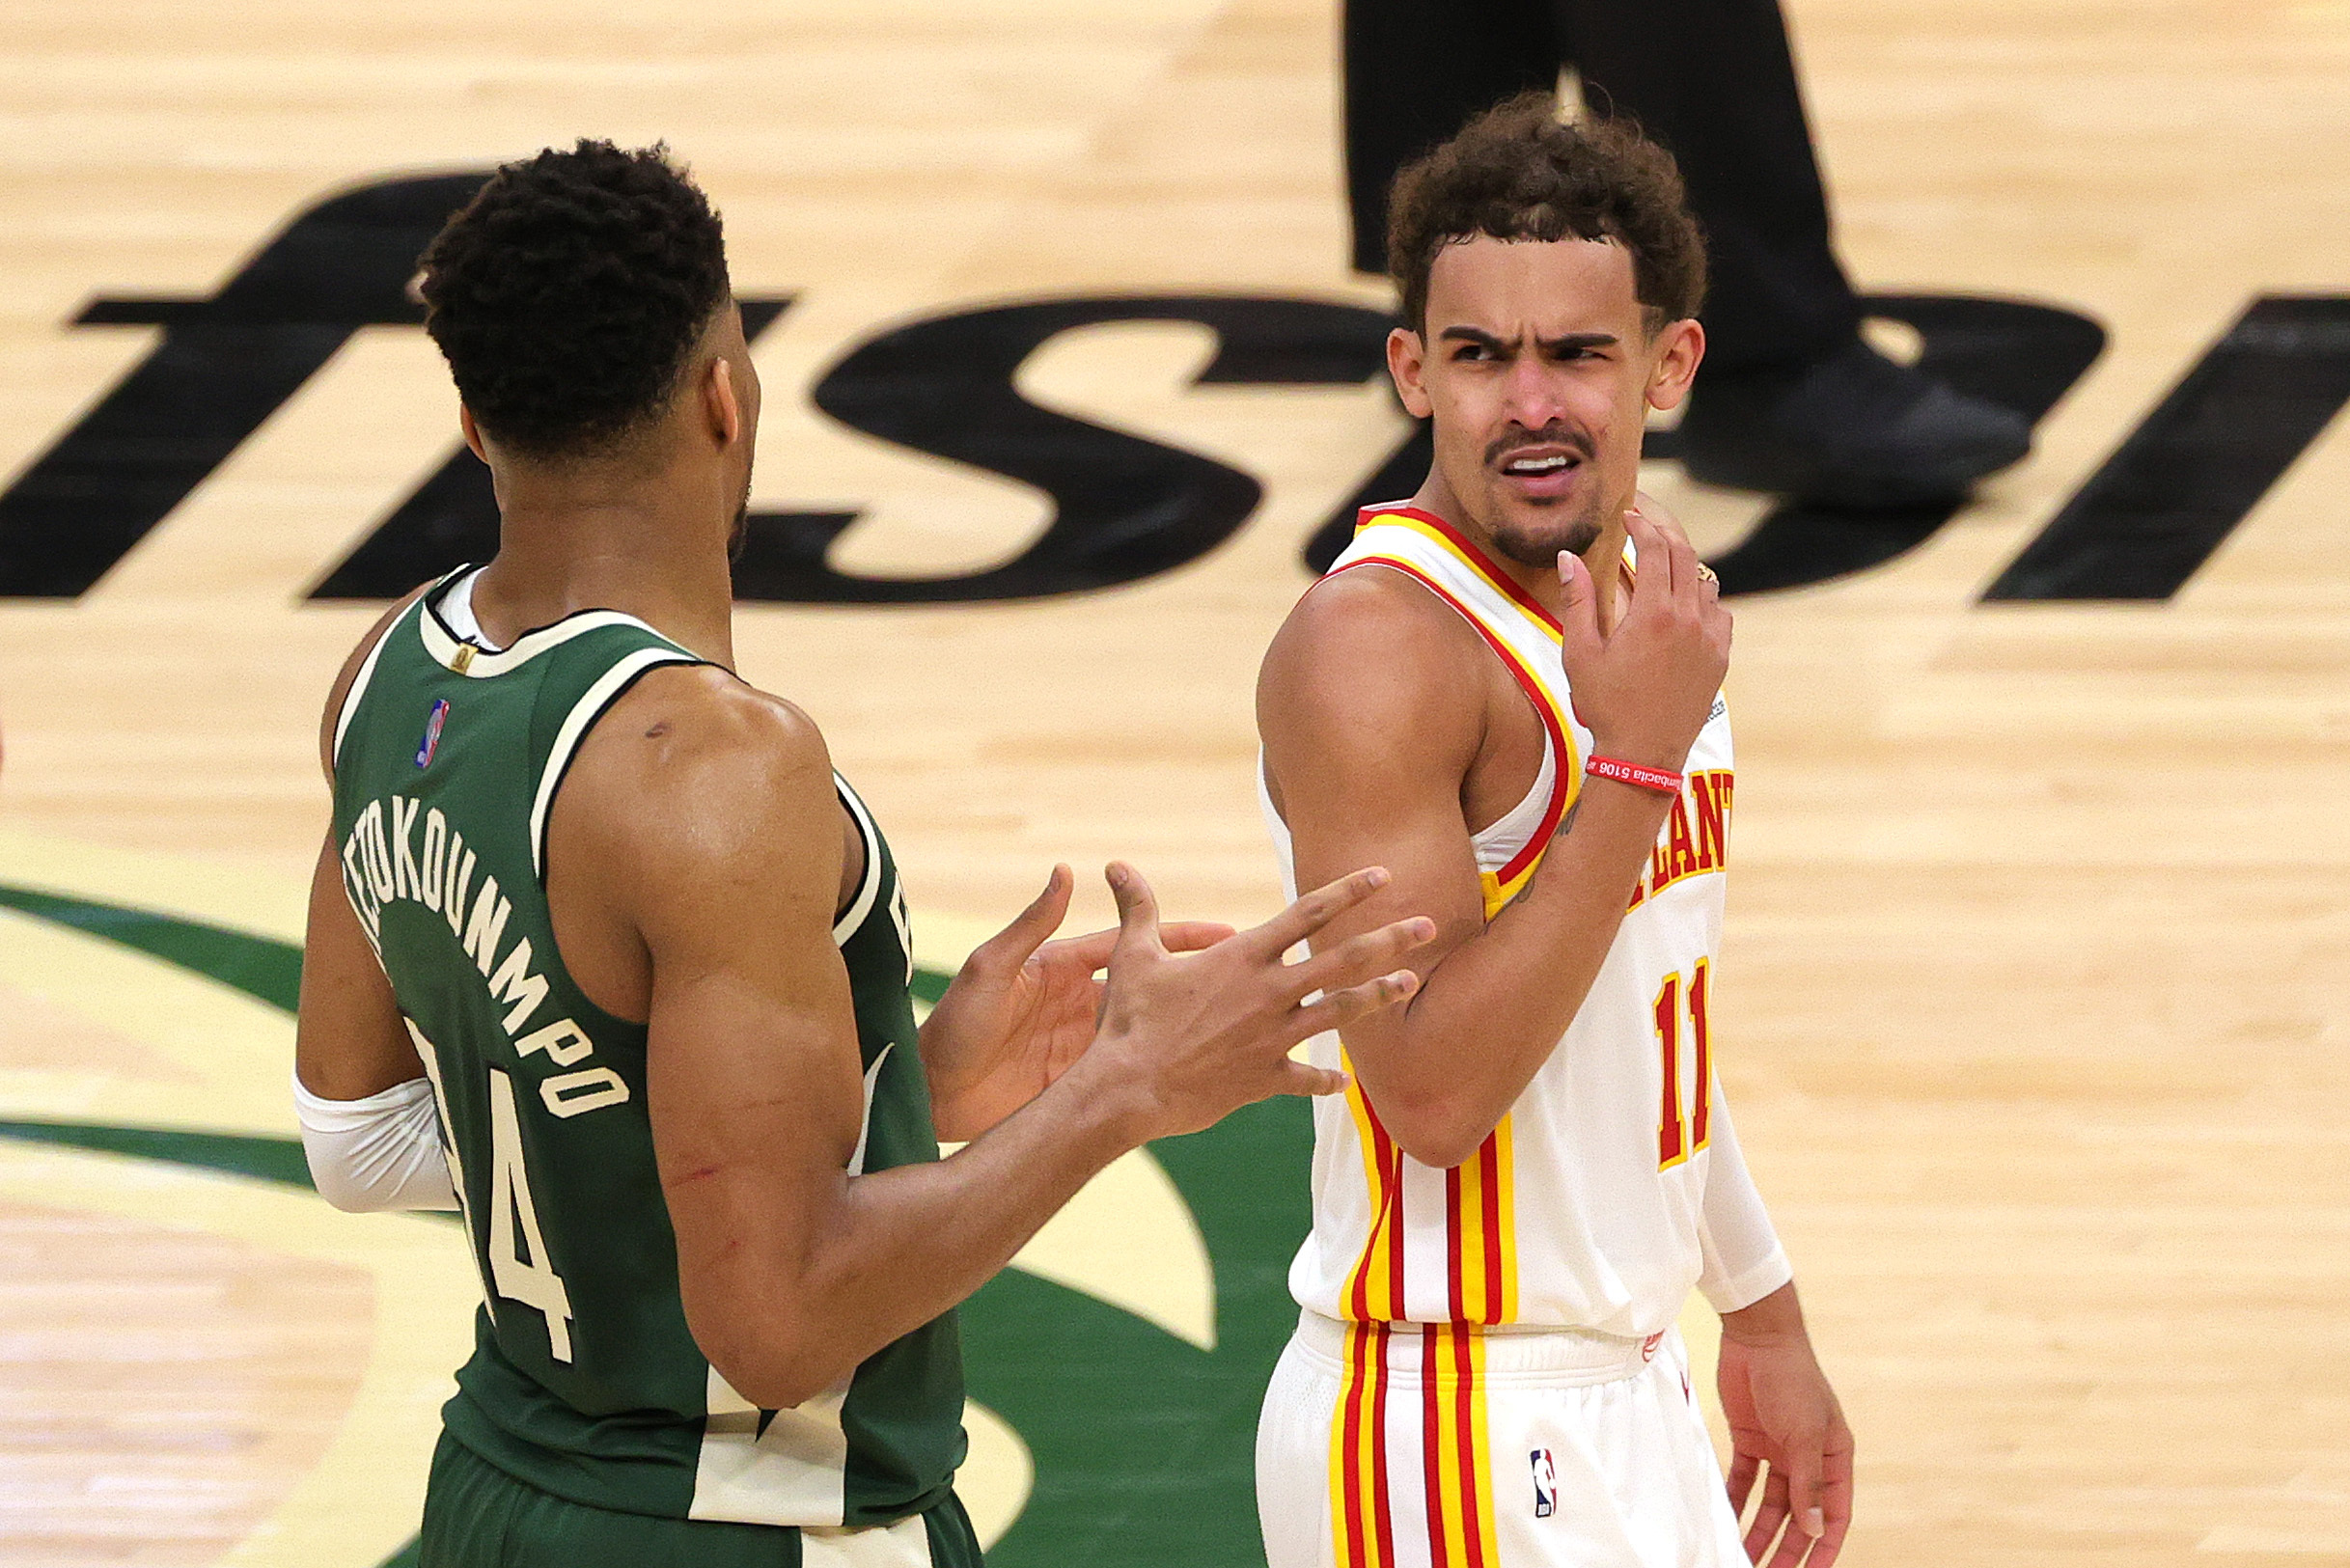 Trae Young's last-second floater lifts Hawks to Game 1 win over